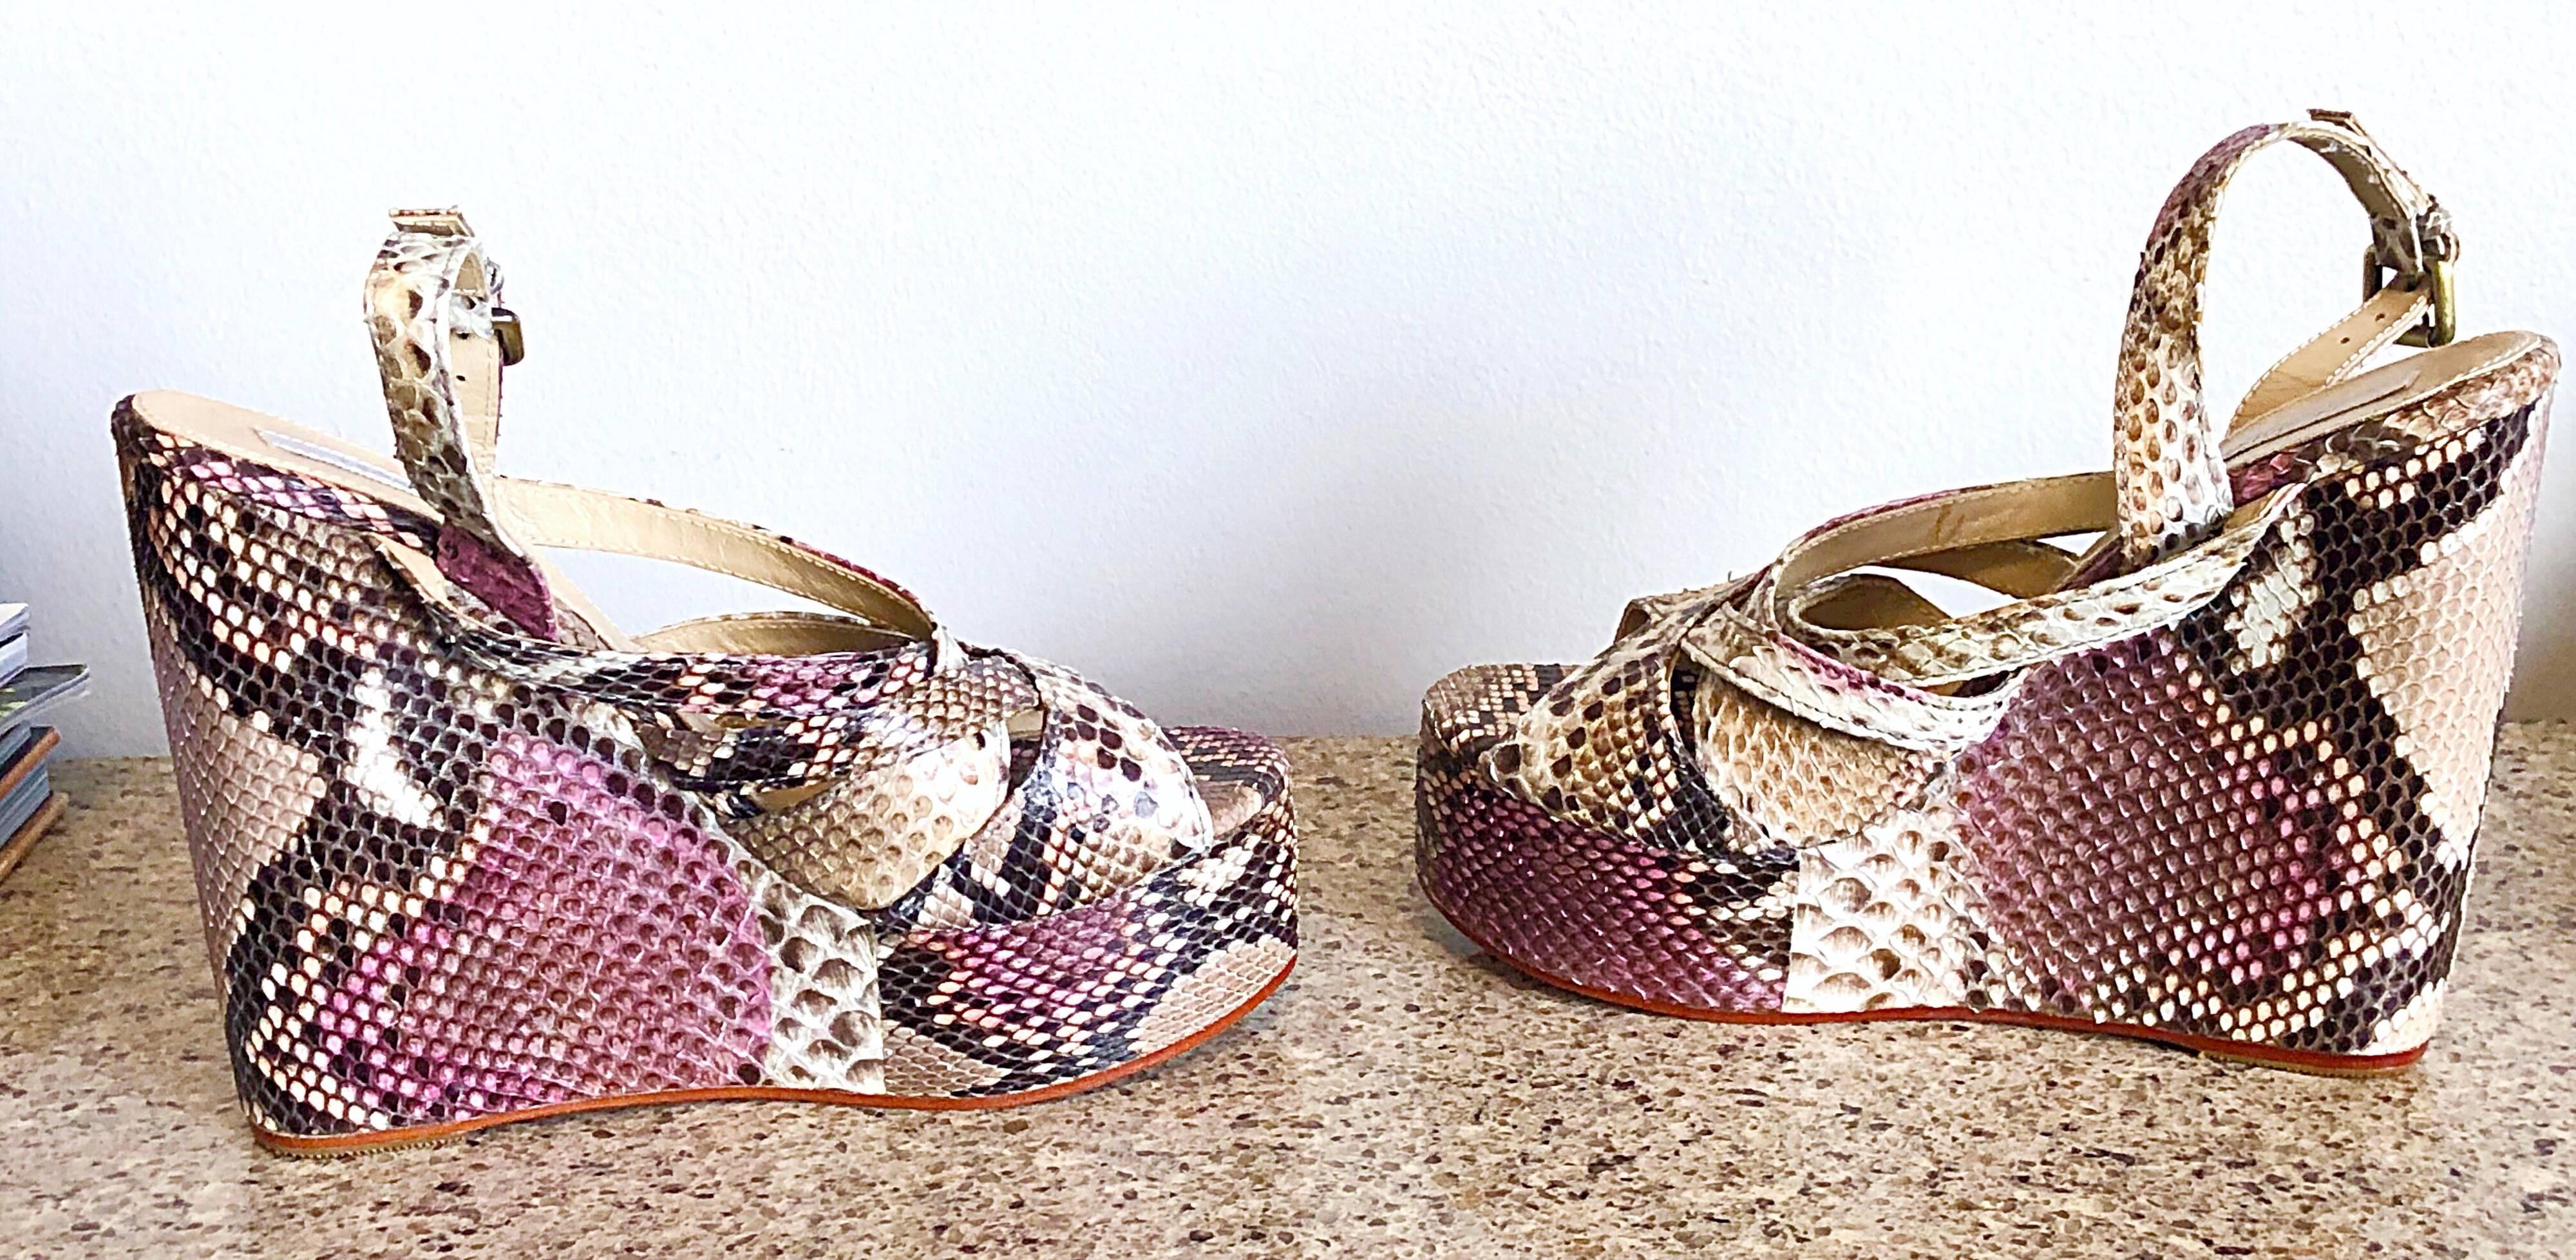 Brand New Nmbr Nine Size 9 Python Pink Snakeskin Platform Wedges Heels Sandals In New Condition For Sale In San Diego, CA